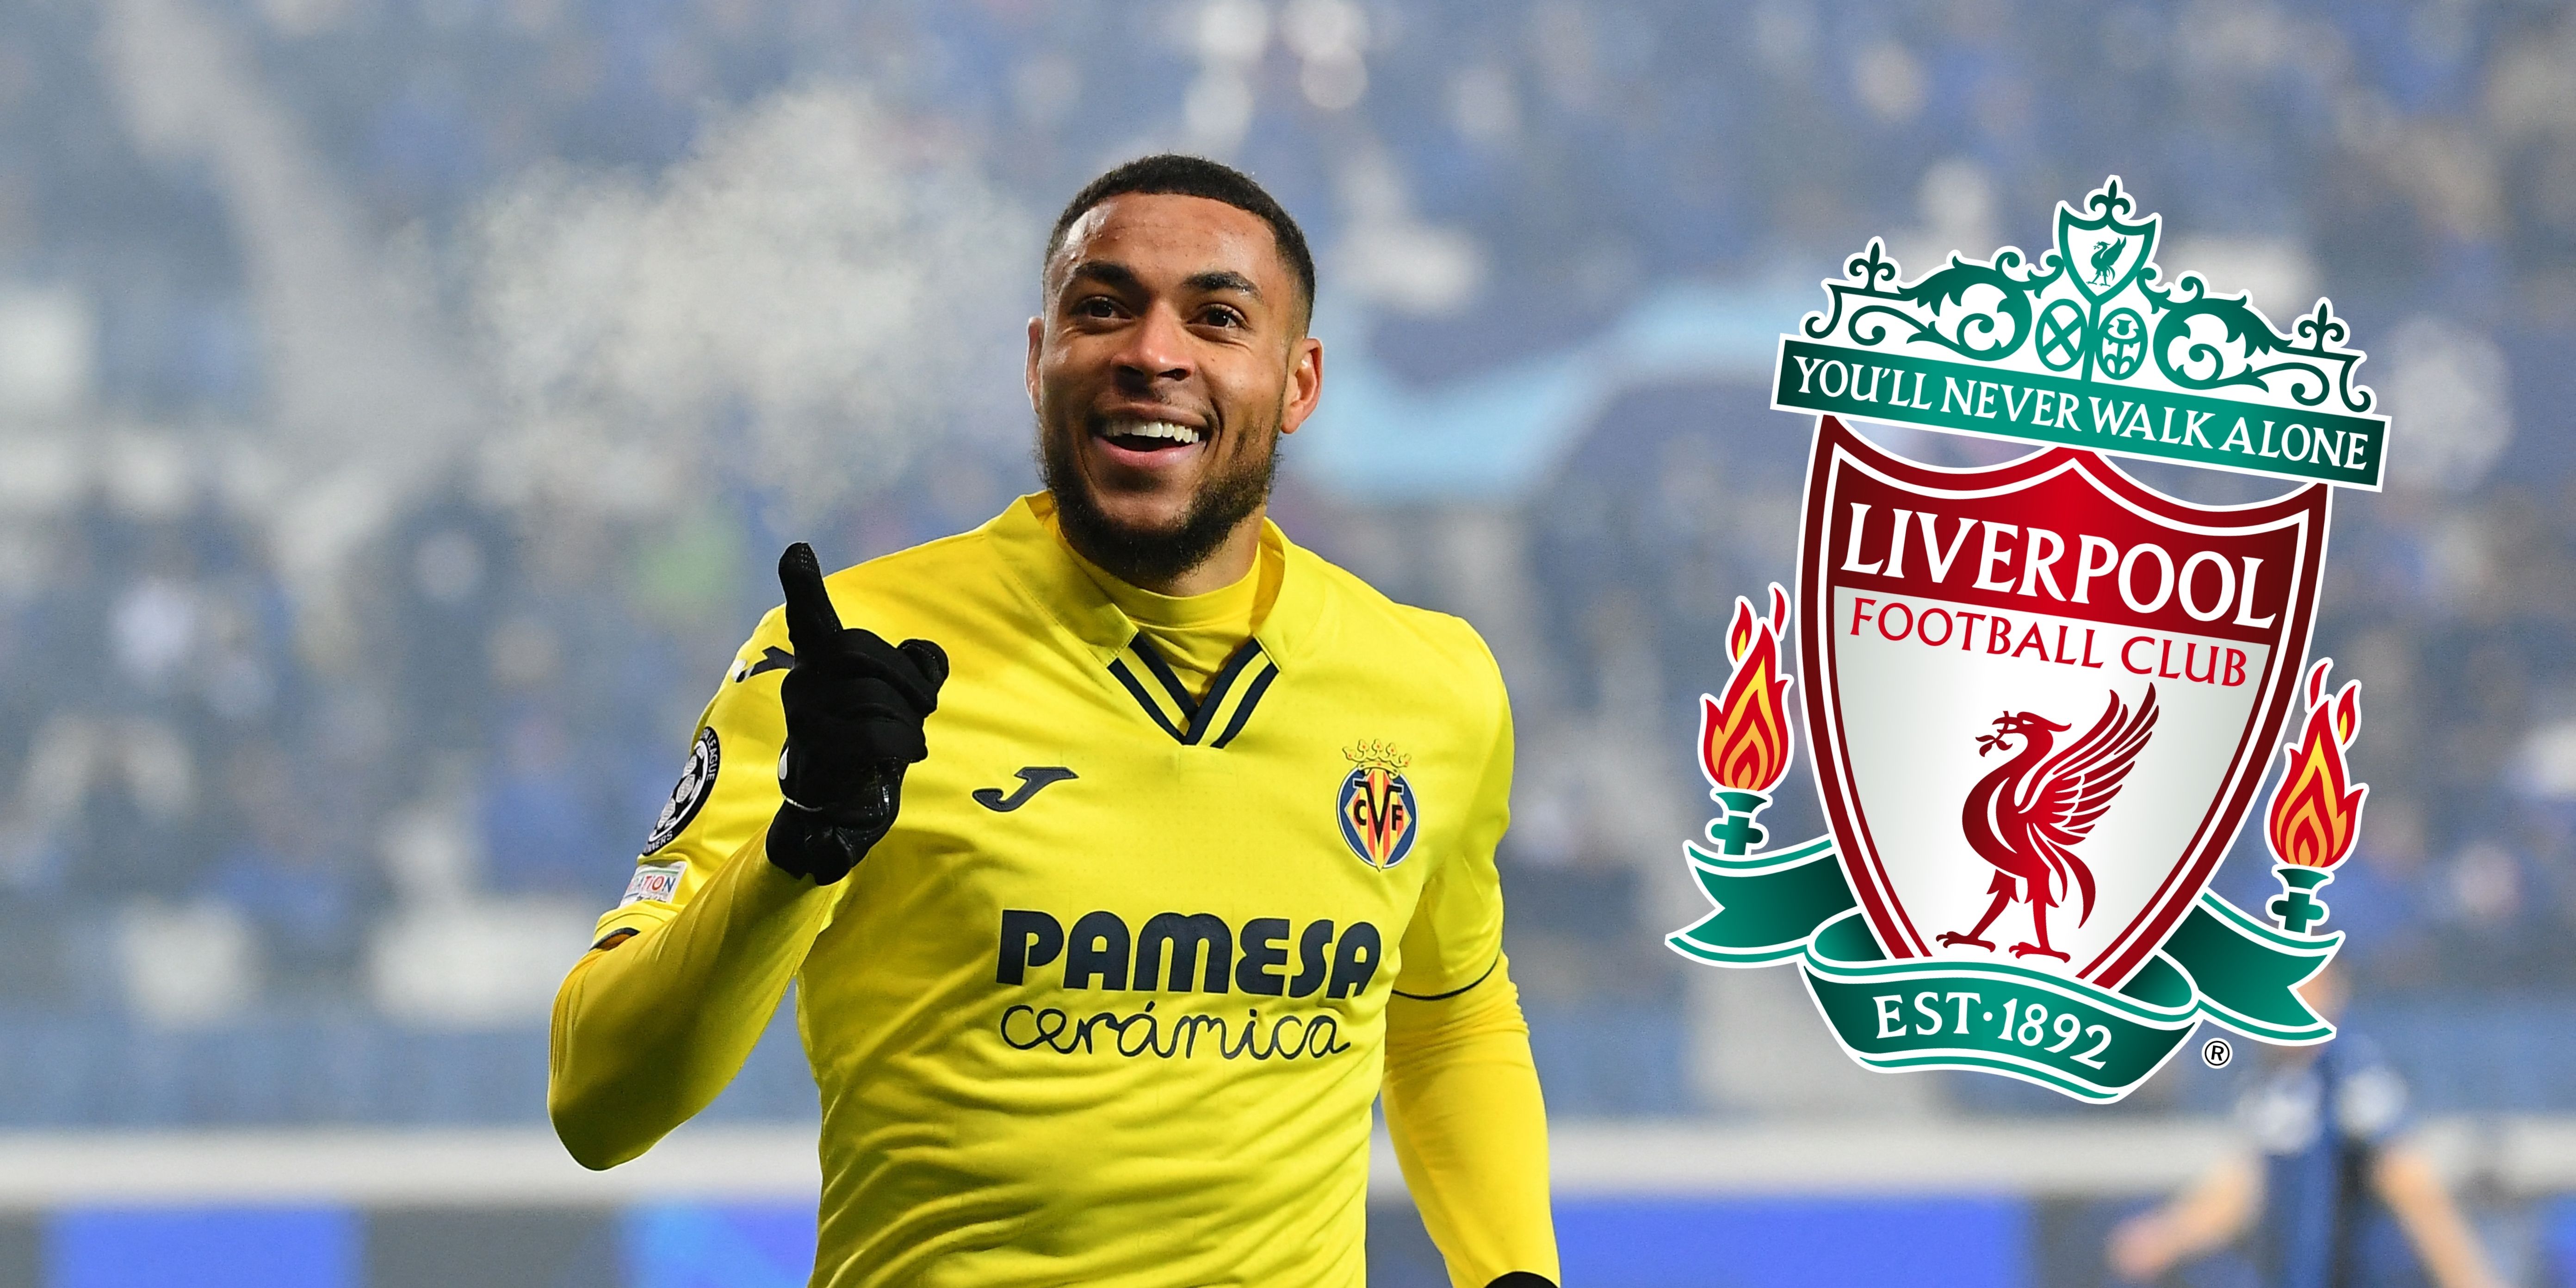 Arnaut Danjuma hints he’d be open to Liverpool move when responding to reported interest – Reds could snap him up for £38m